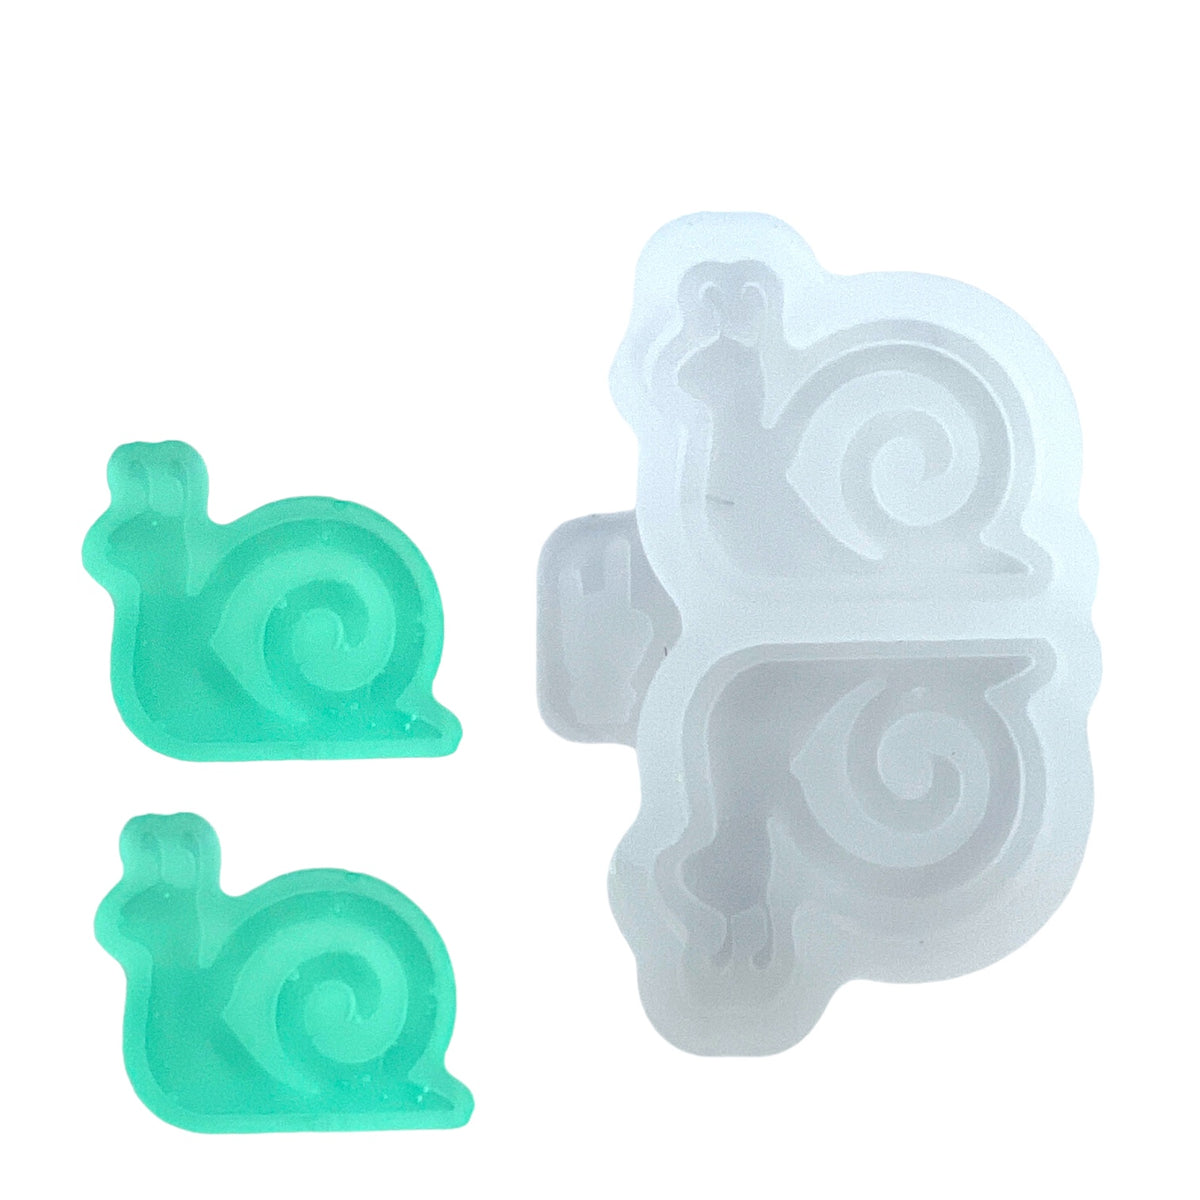 Tiny Snail Resin Rockers Exclusive Stud Earring Mold for UV and Epoxy Resin